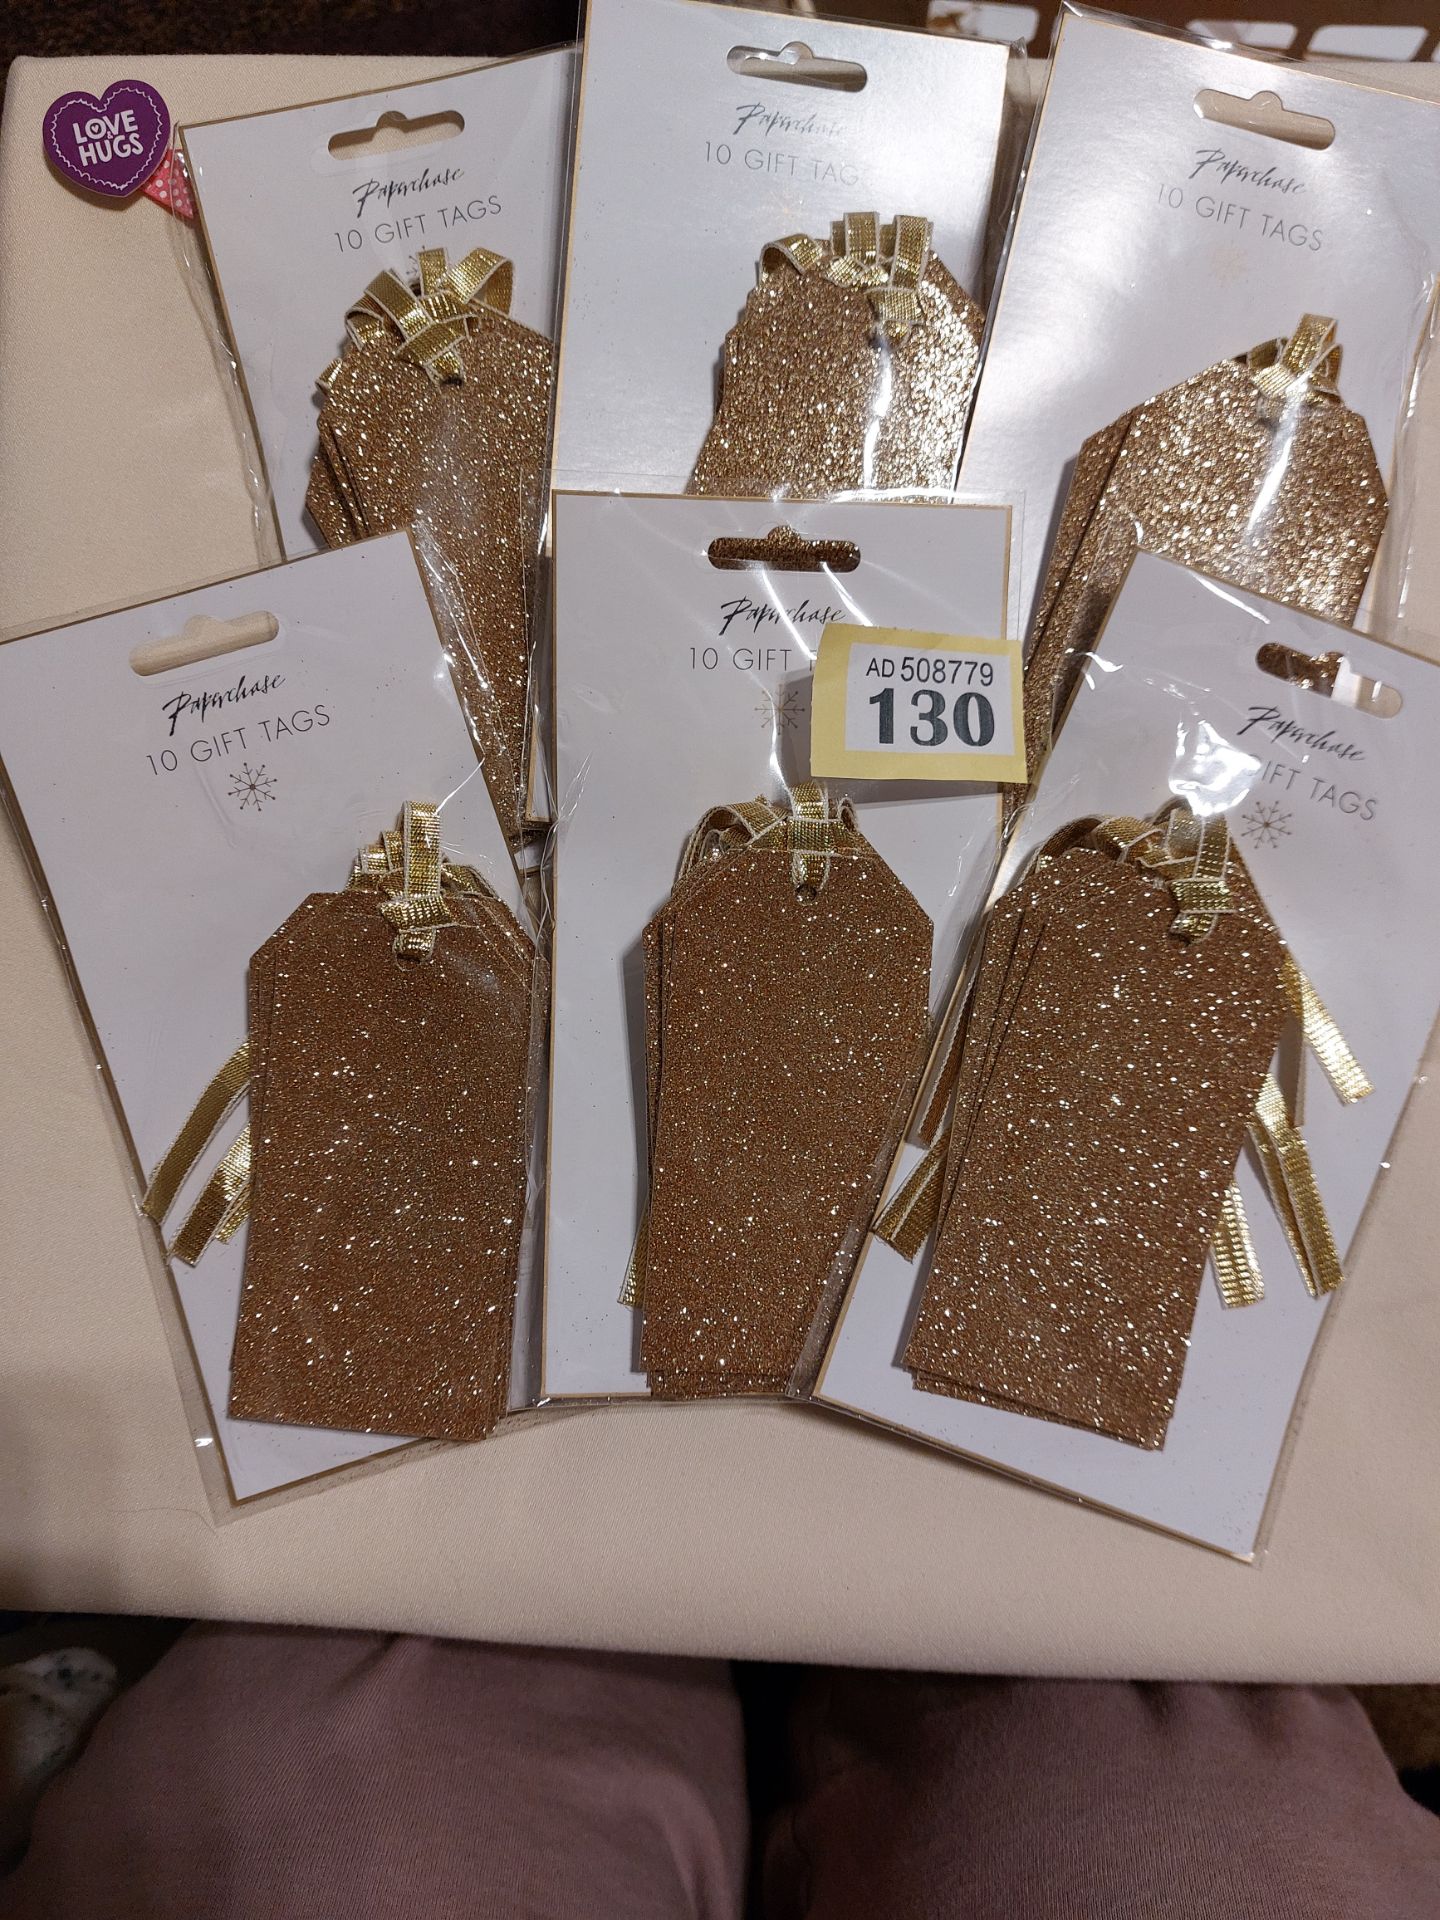 Gold Glittery Tags/Labels. Packs of 10. Box of 120 Packs Total RRP £180